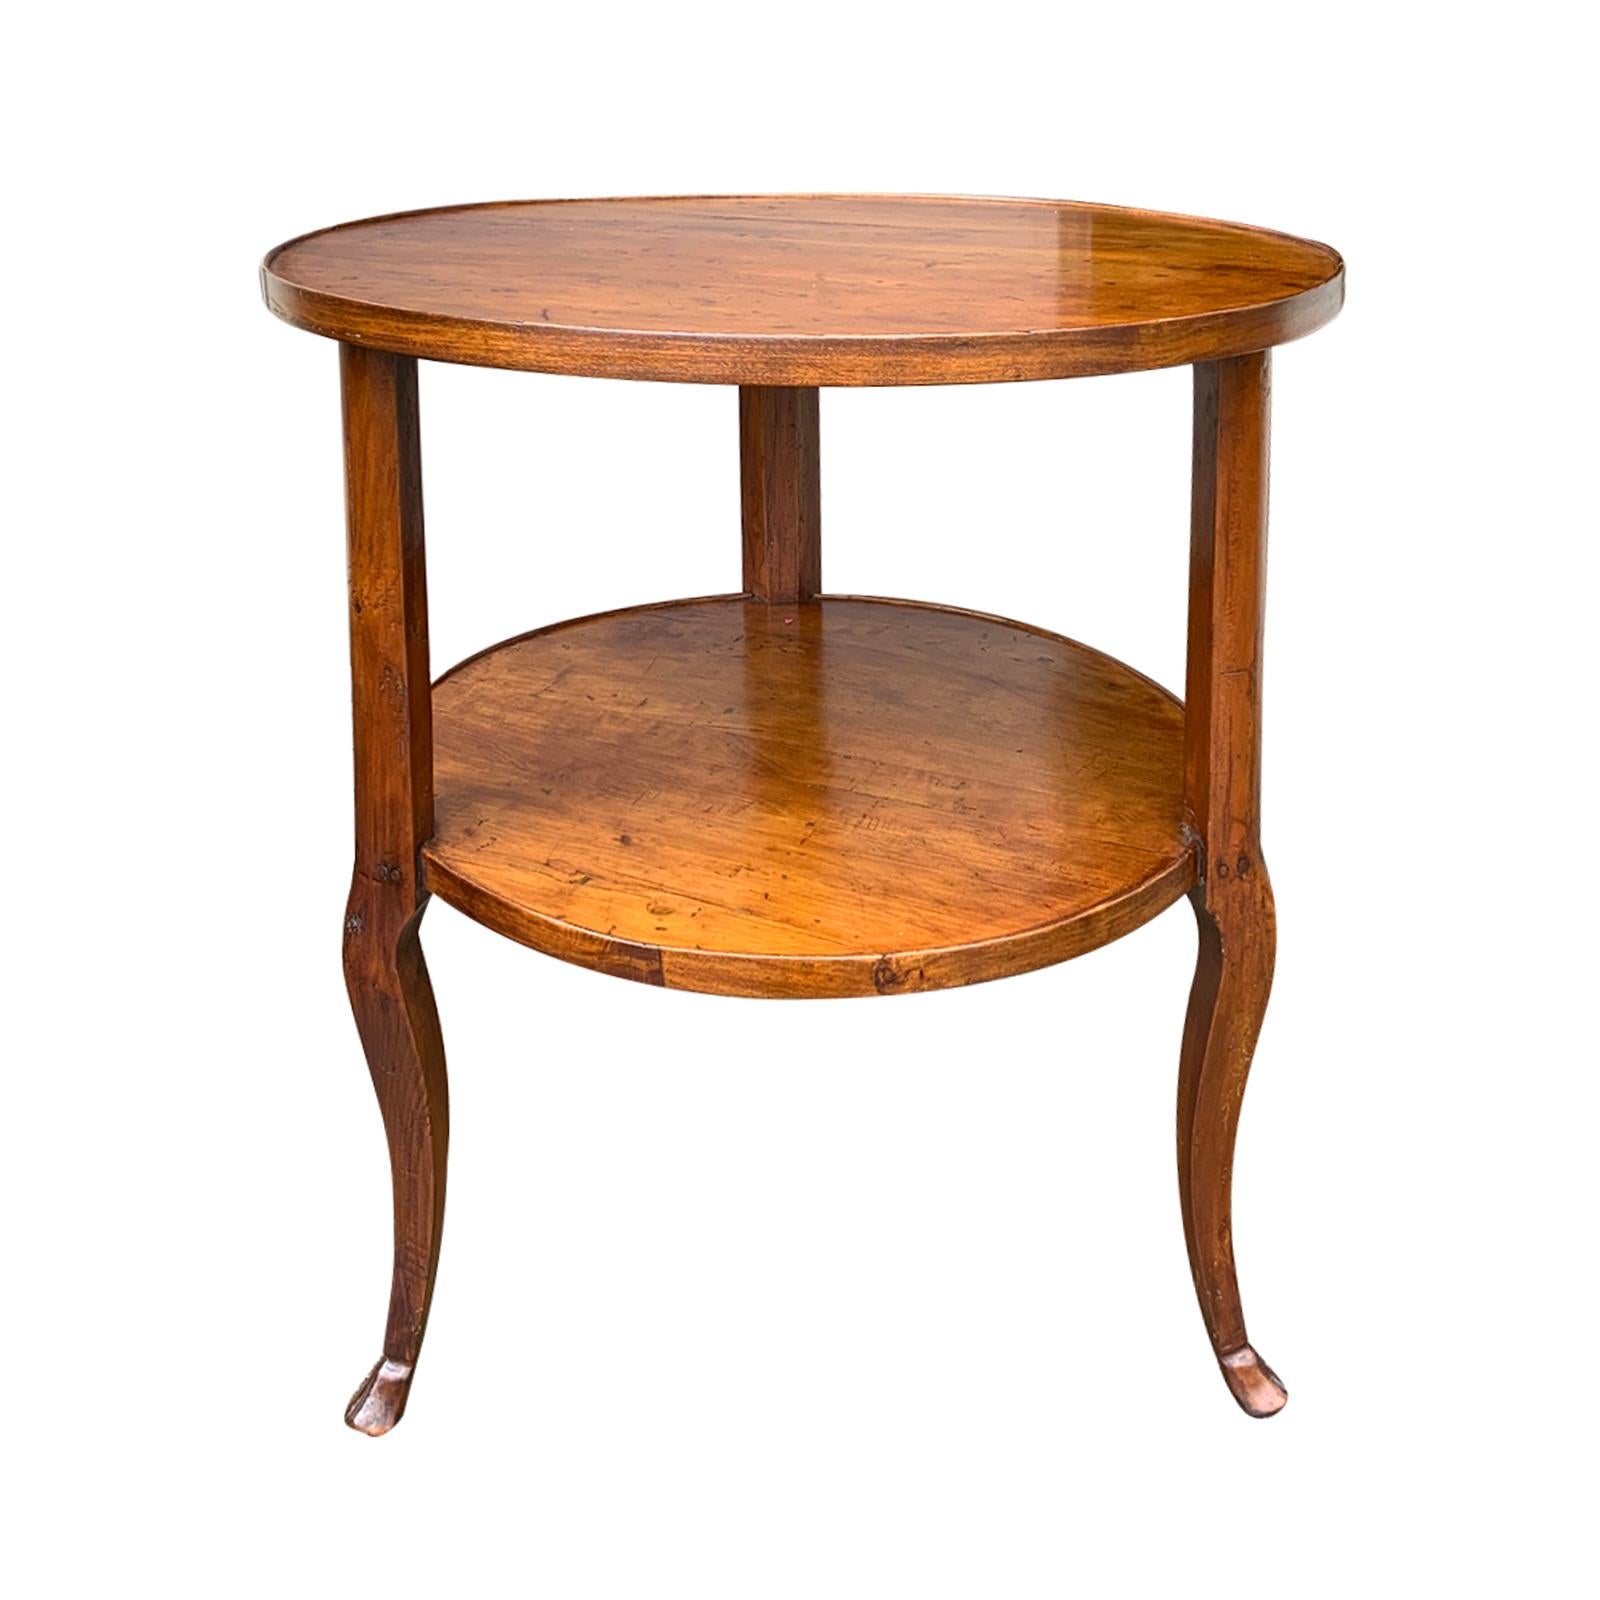 18th-19th Century Continental Round Two-Tier Table with Hoof Feet